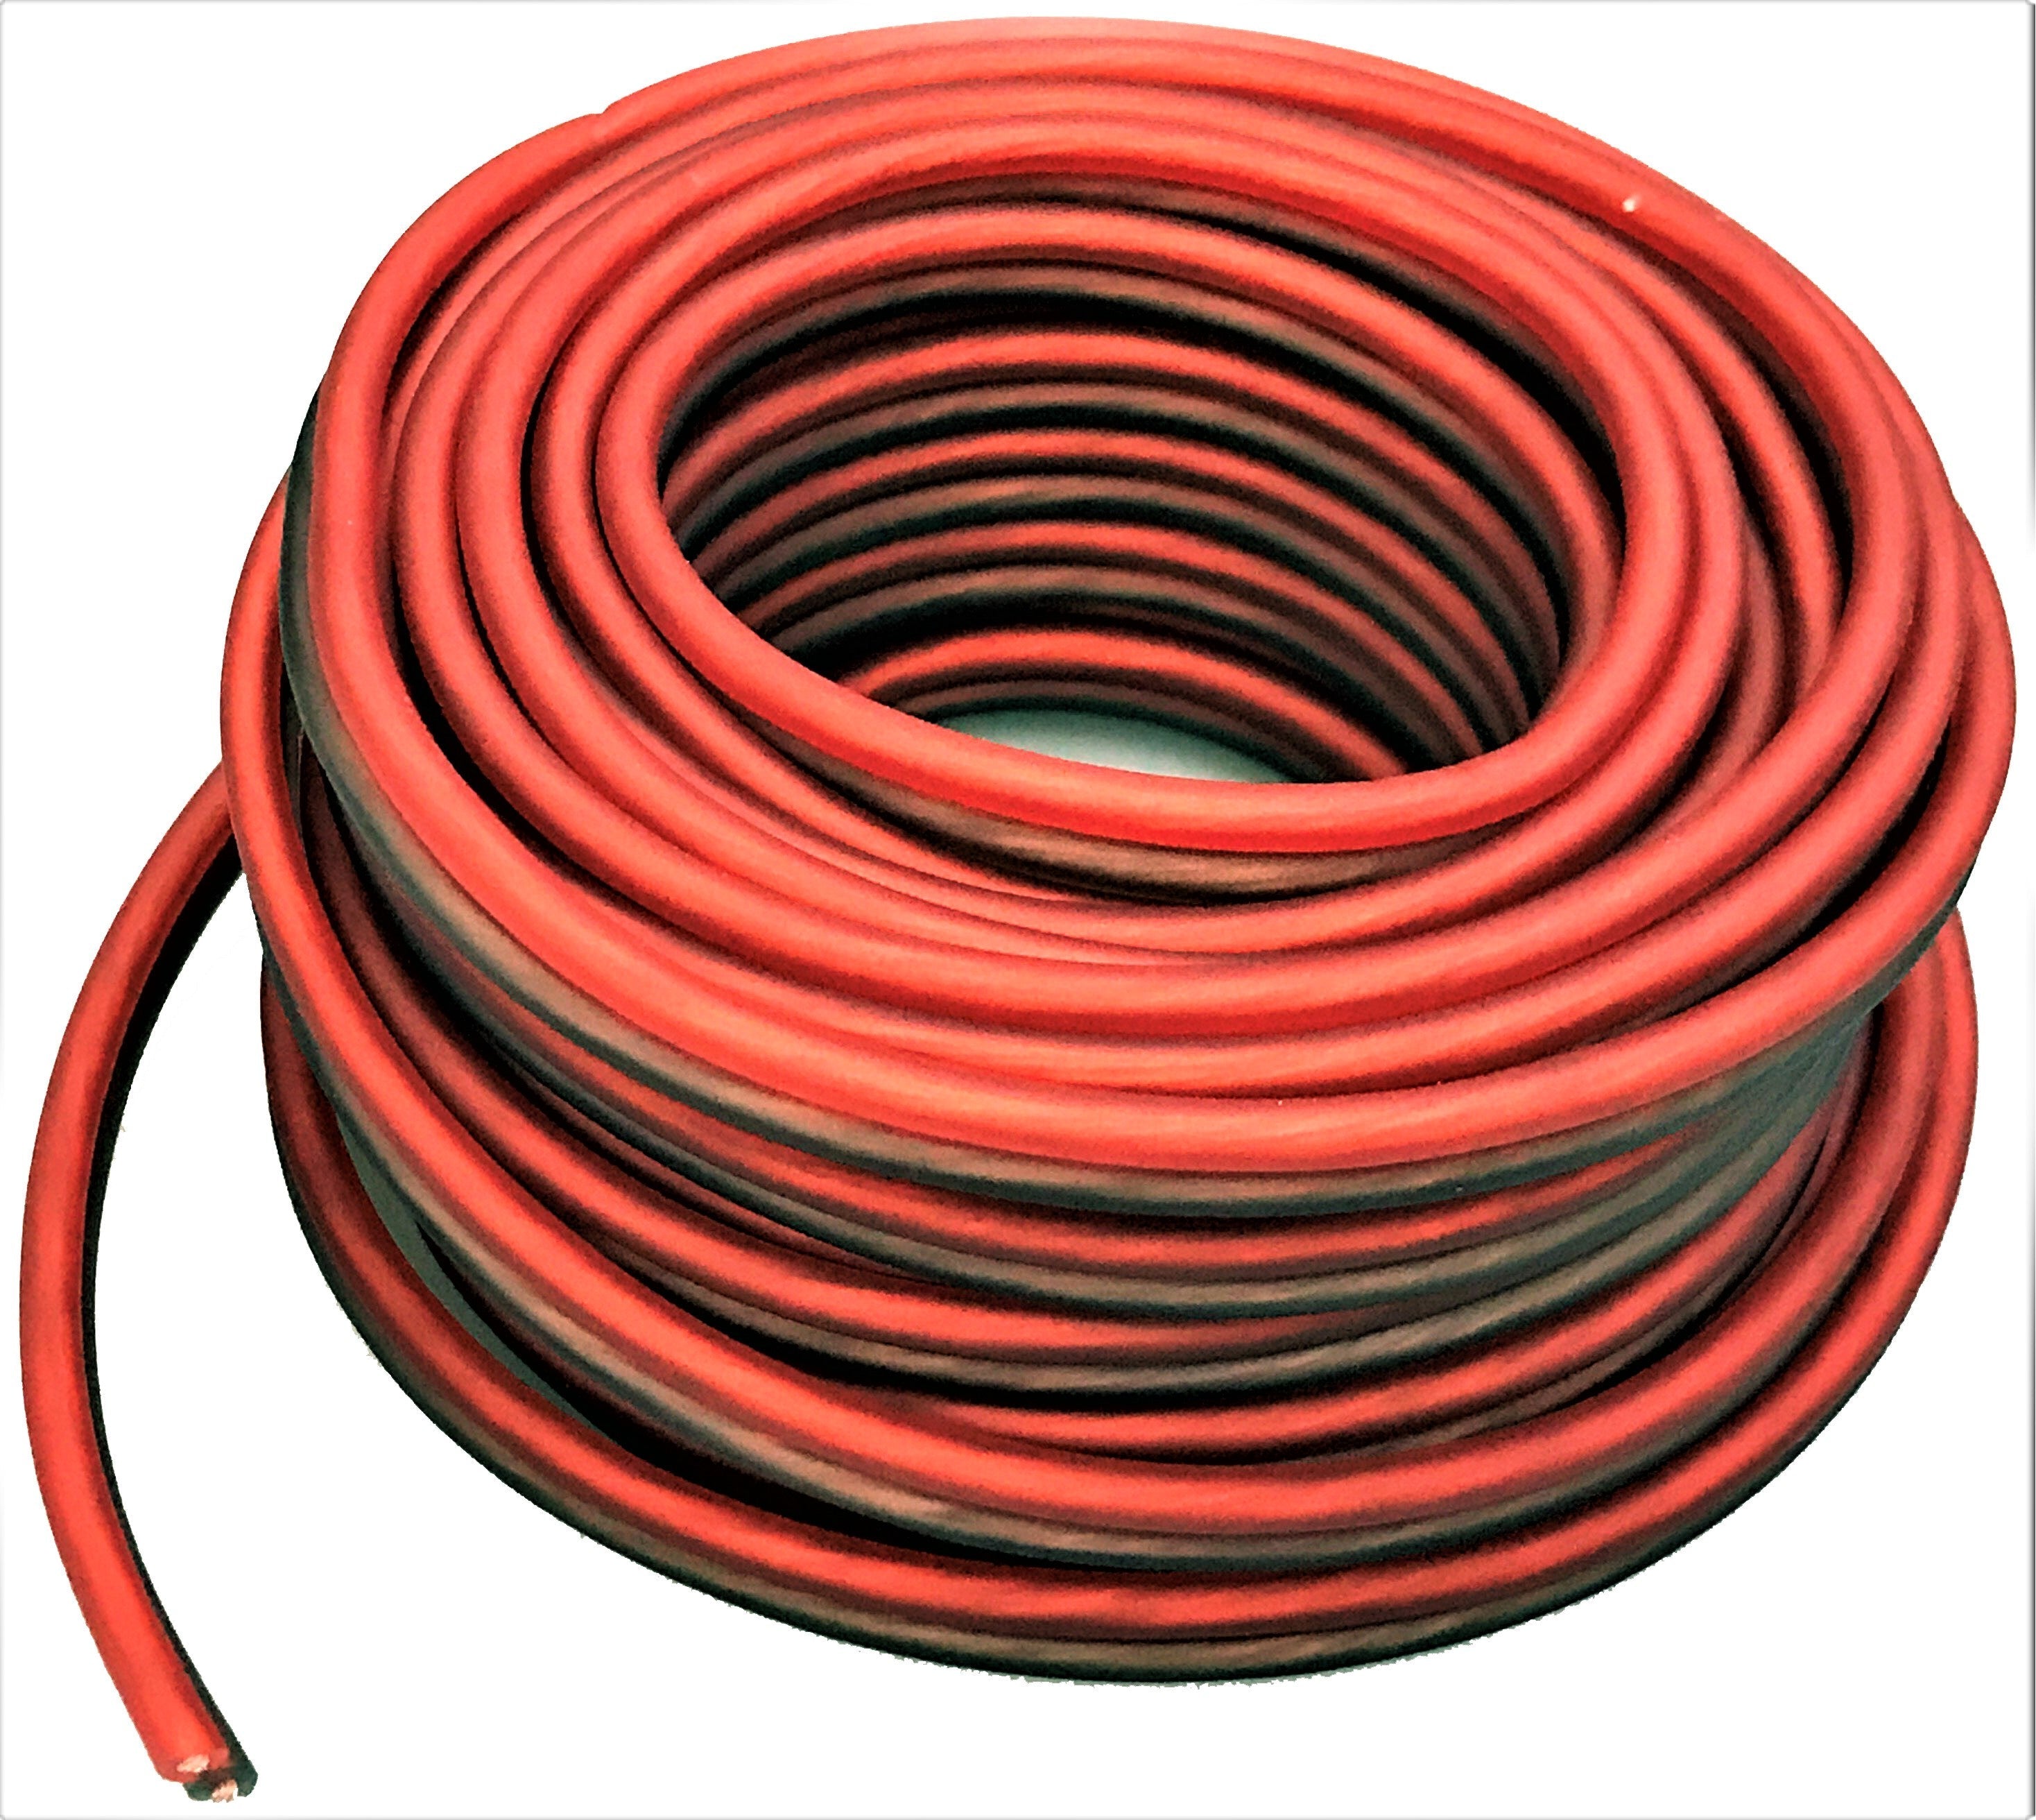 2 Patron 100' feet 14 Gauge Red Black Stranded 2 Conductor Speaker Wire Car Home Audio